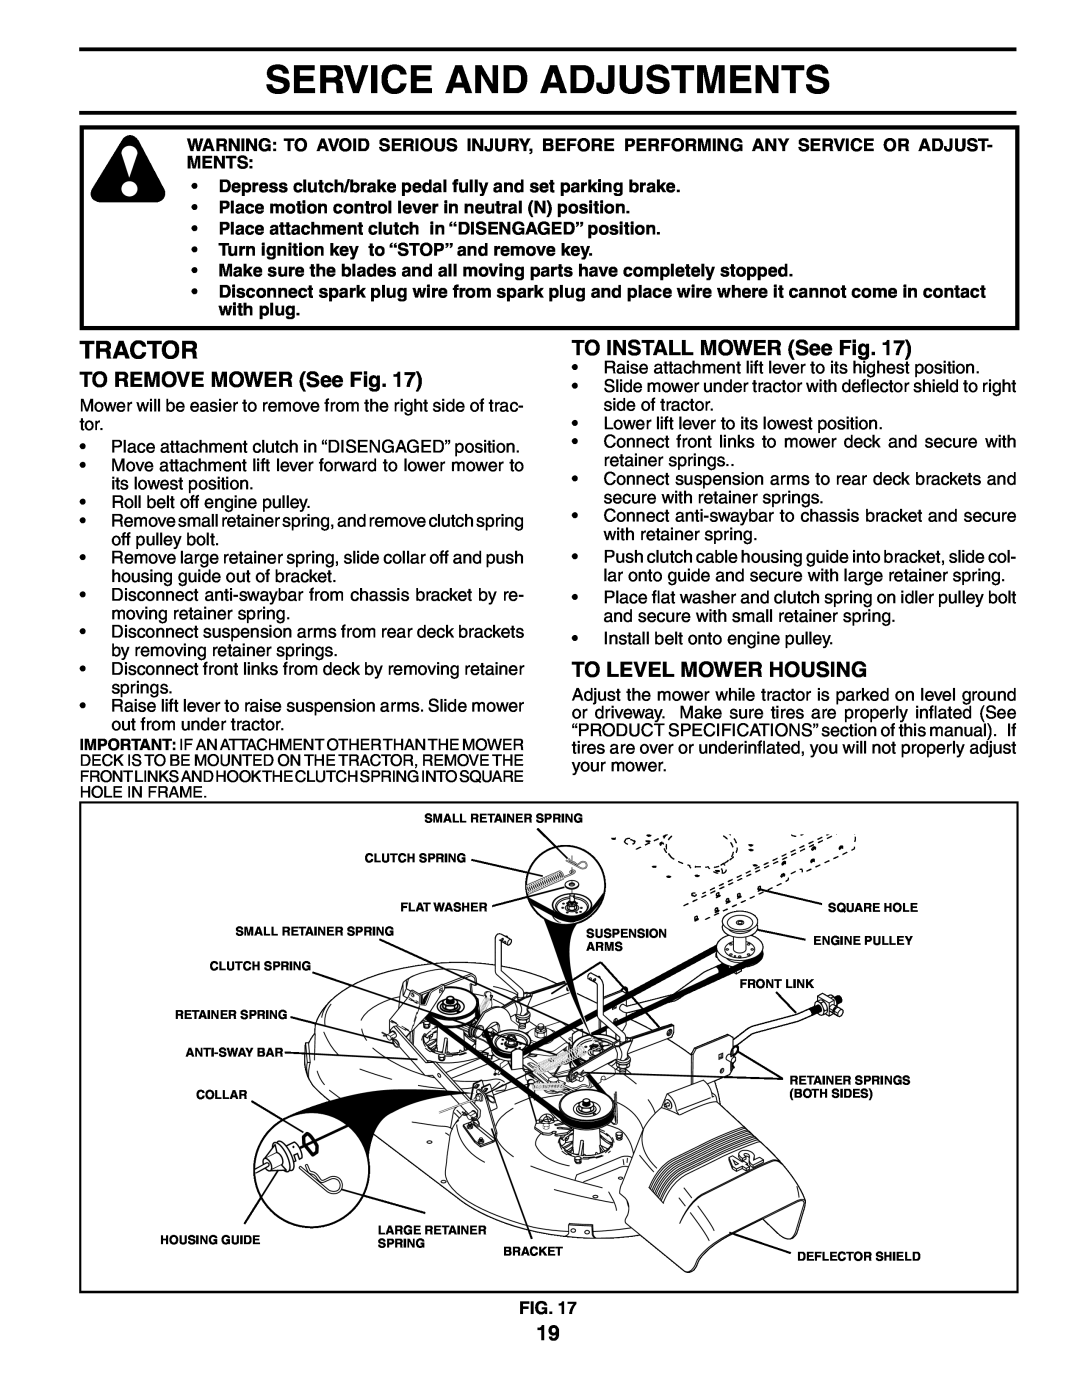 Poulan 194831 Service And Adjustments, TO REMOVE MOWER See Fig, TO INSTALL MOWER See Fig, To Level Mower Housing, Tractor 